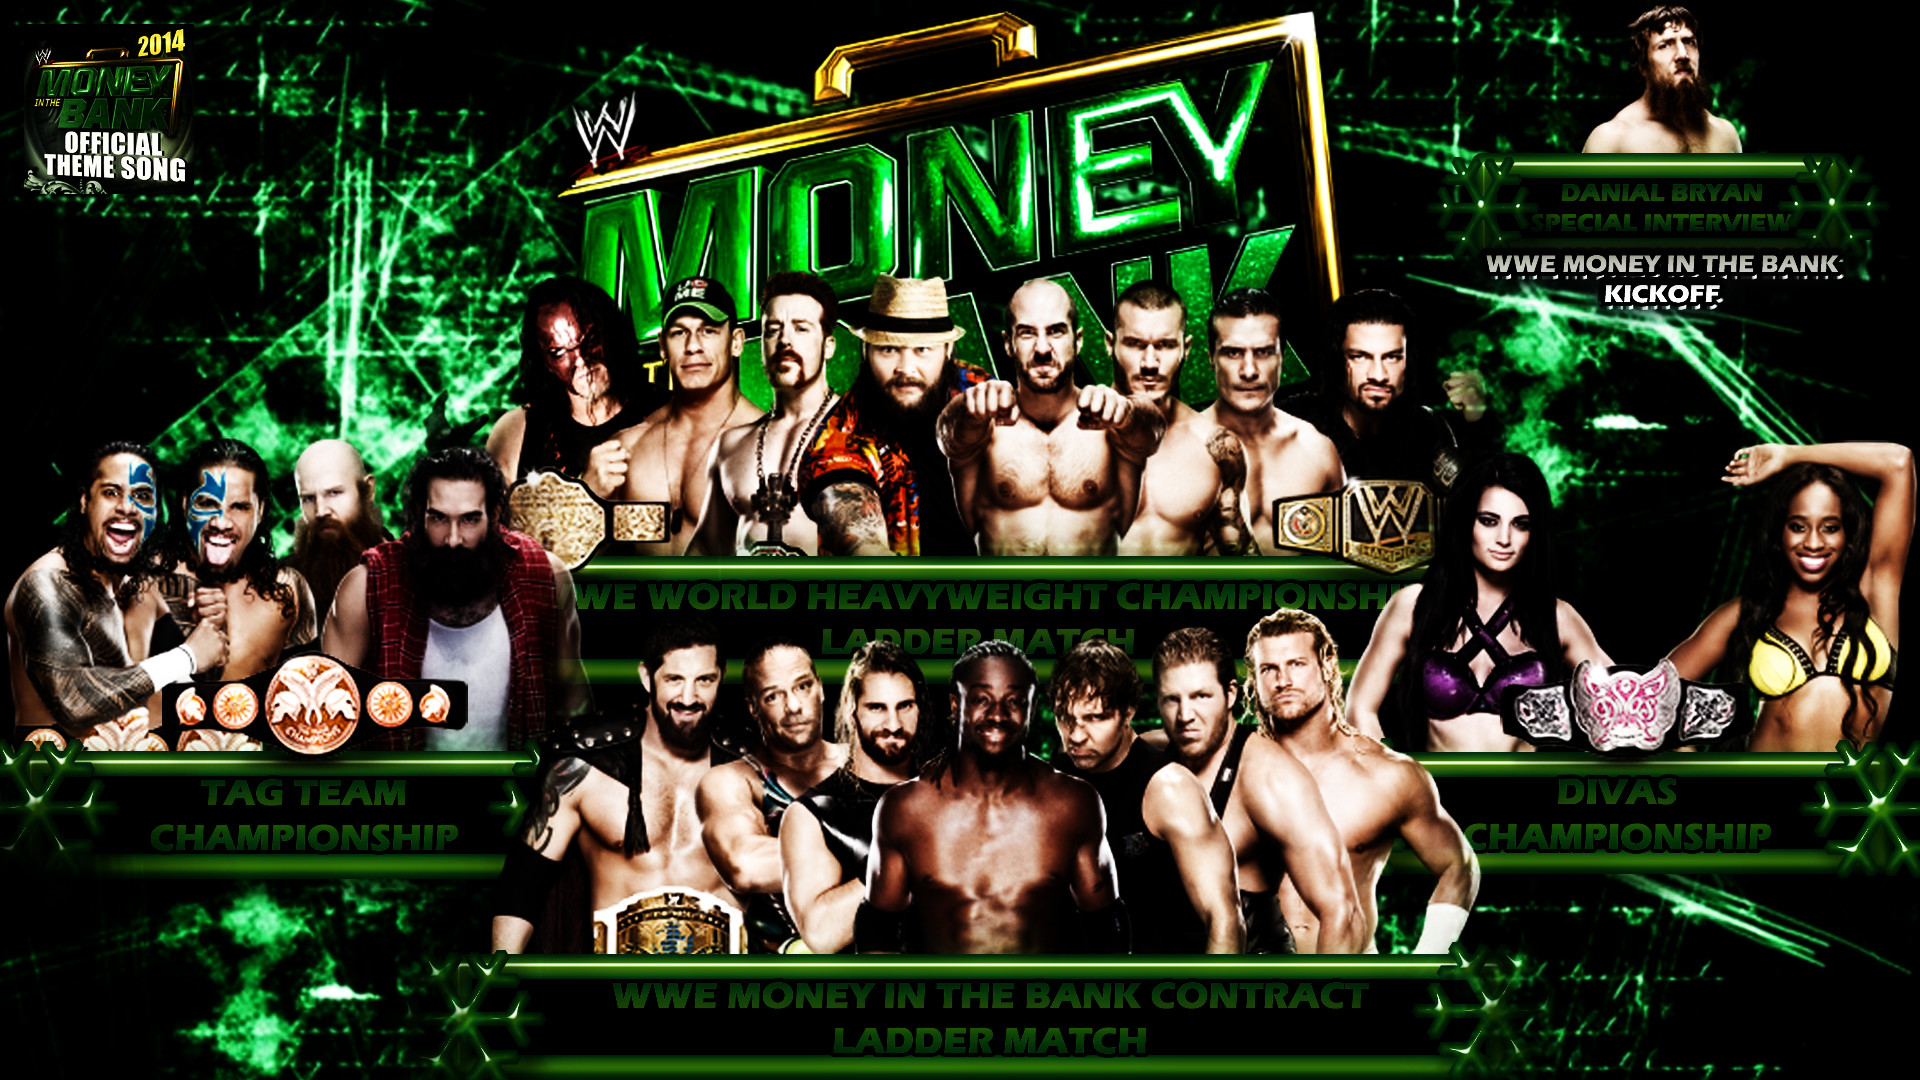 1920x1080 Money In The Bank 2014 Match Card